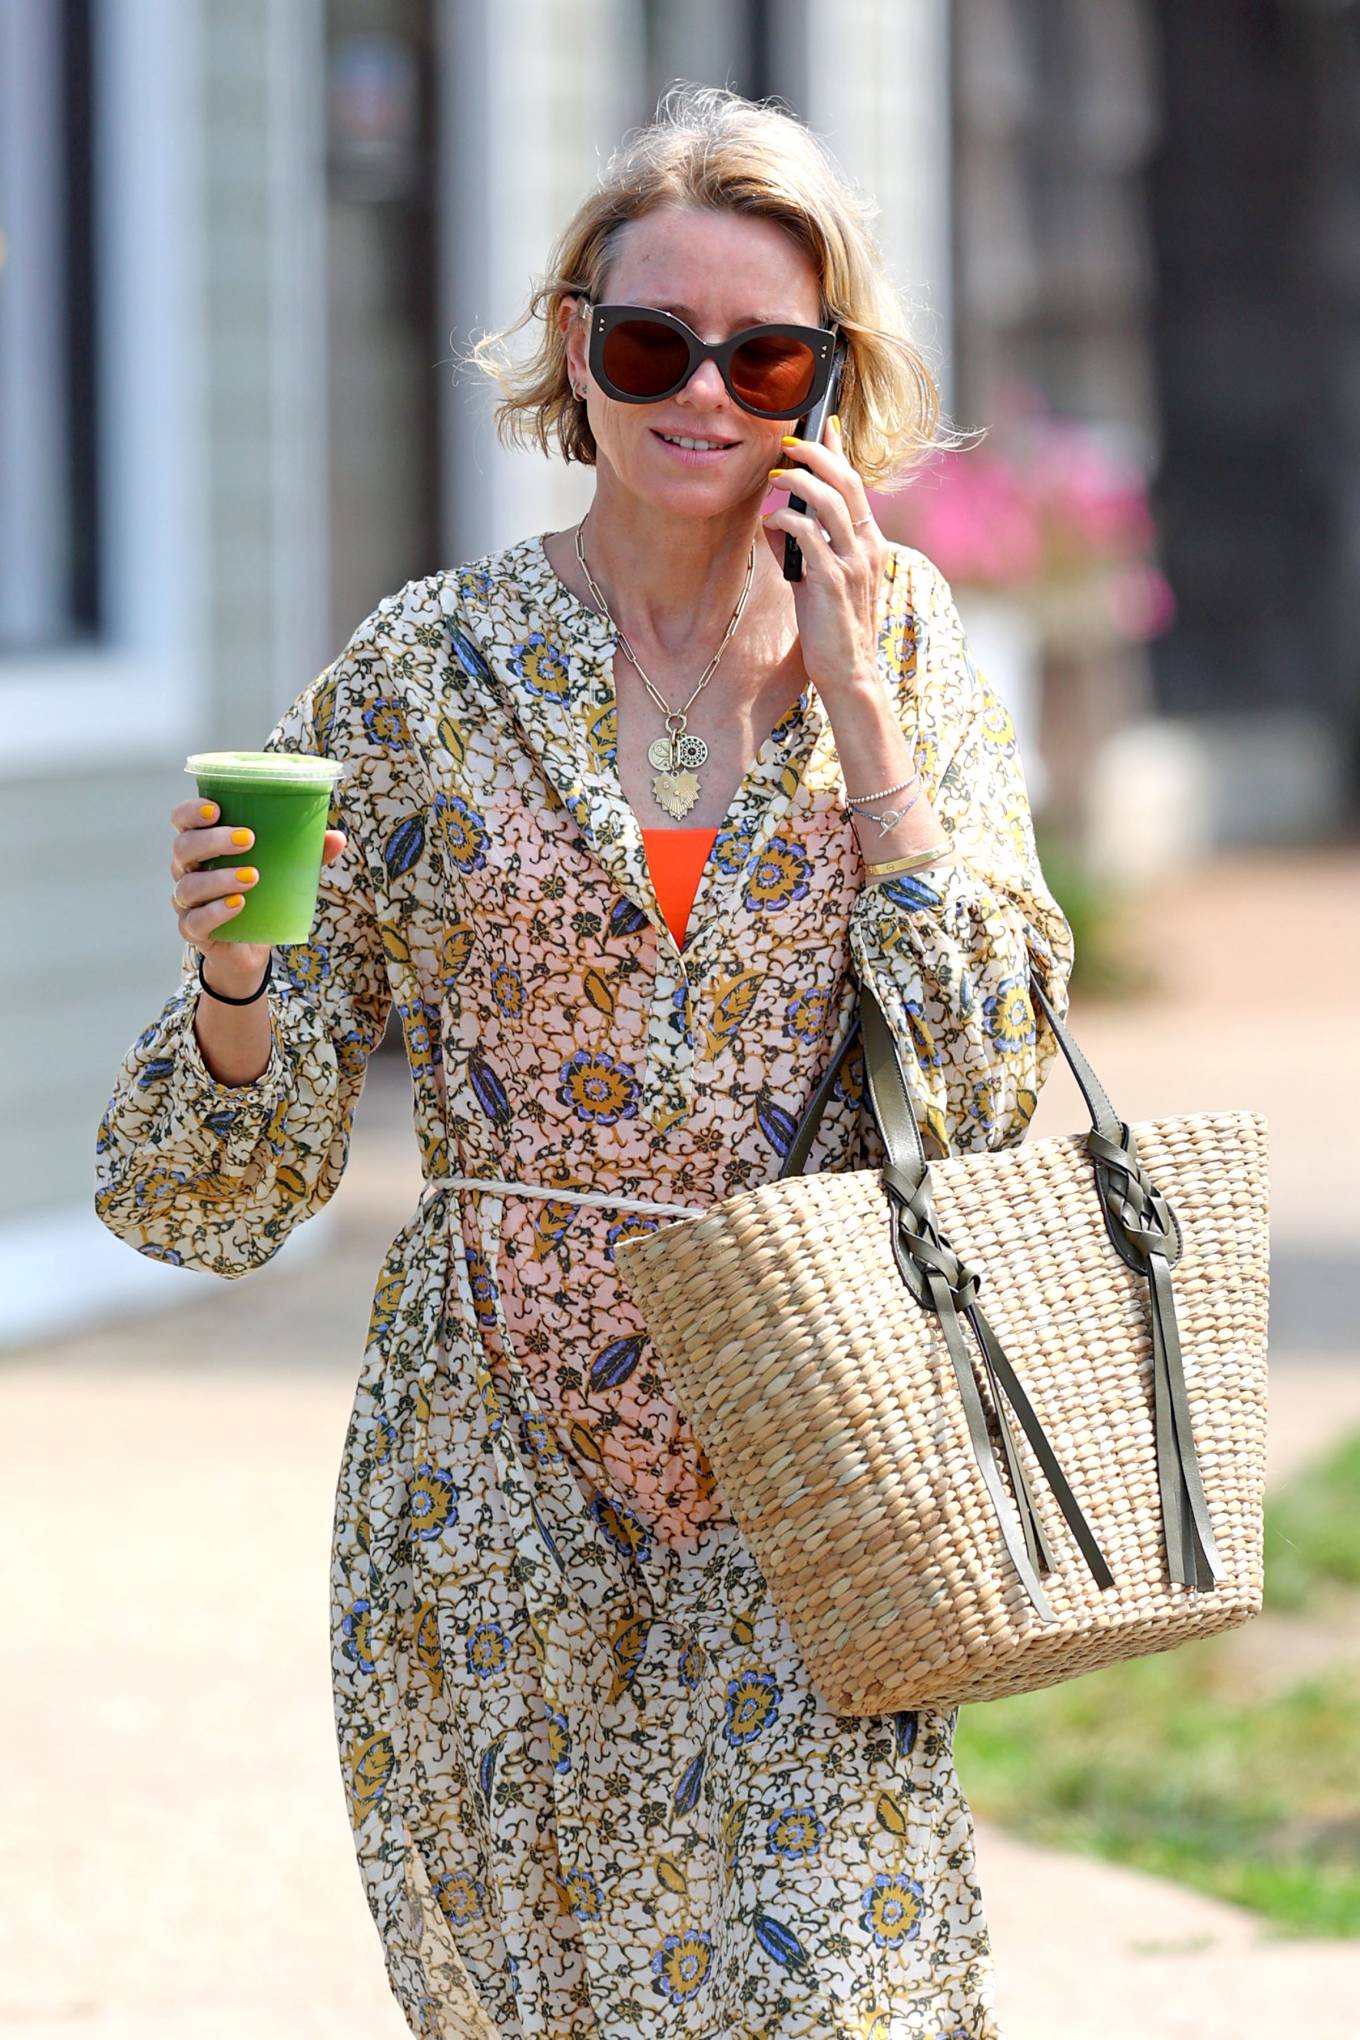 Naomi Watts - Heads out for a fresh green juice in The Hamptons